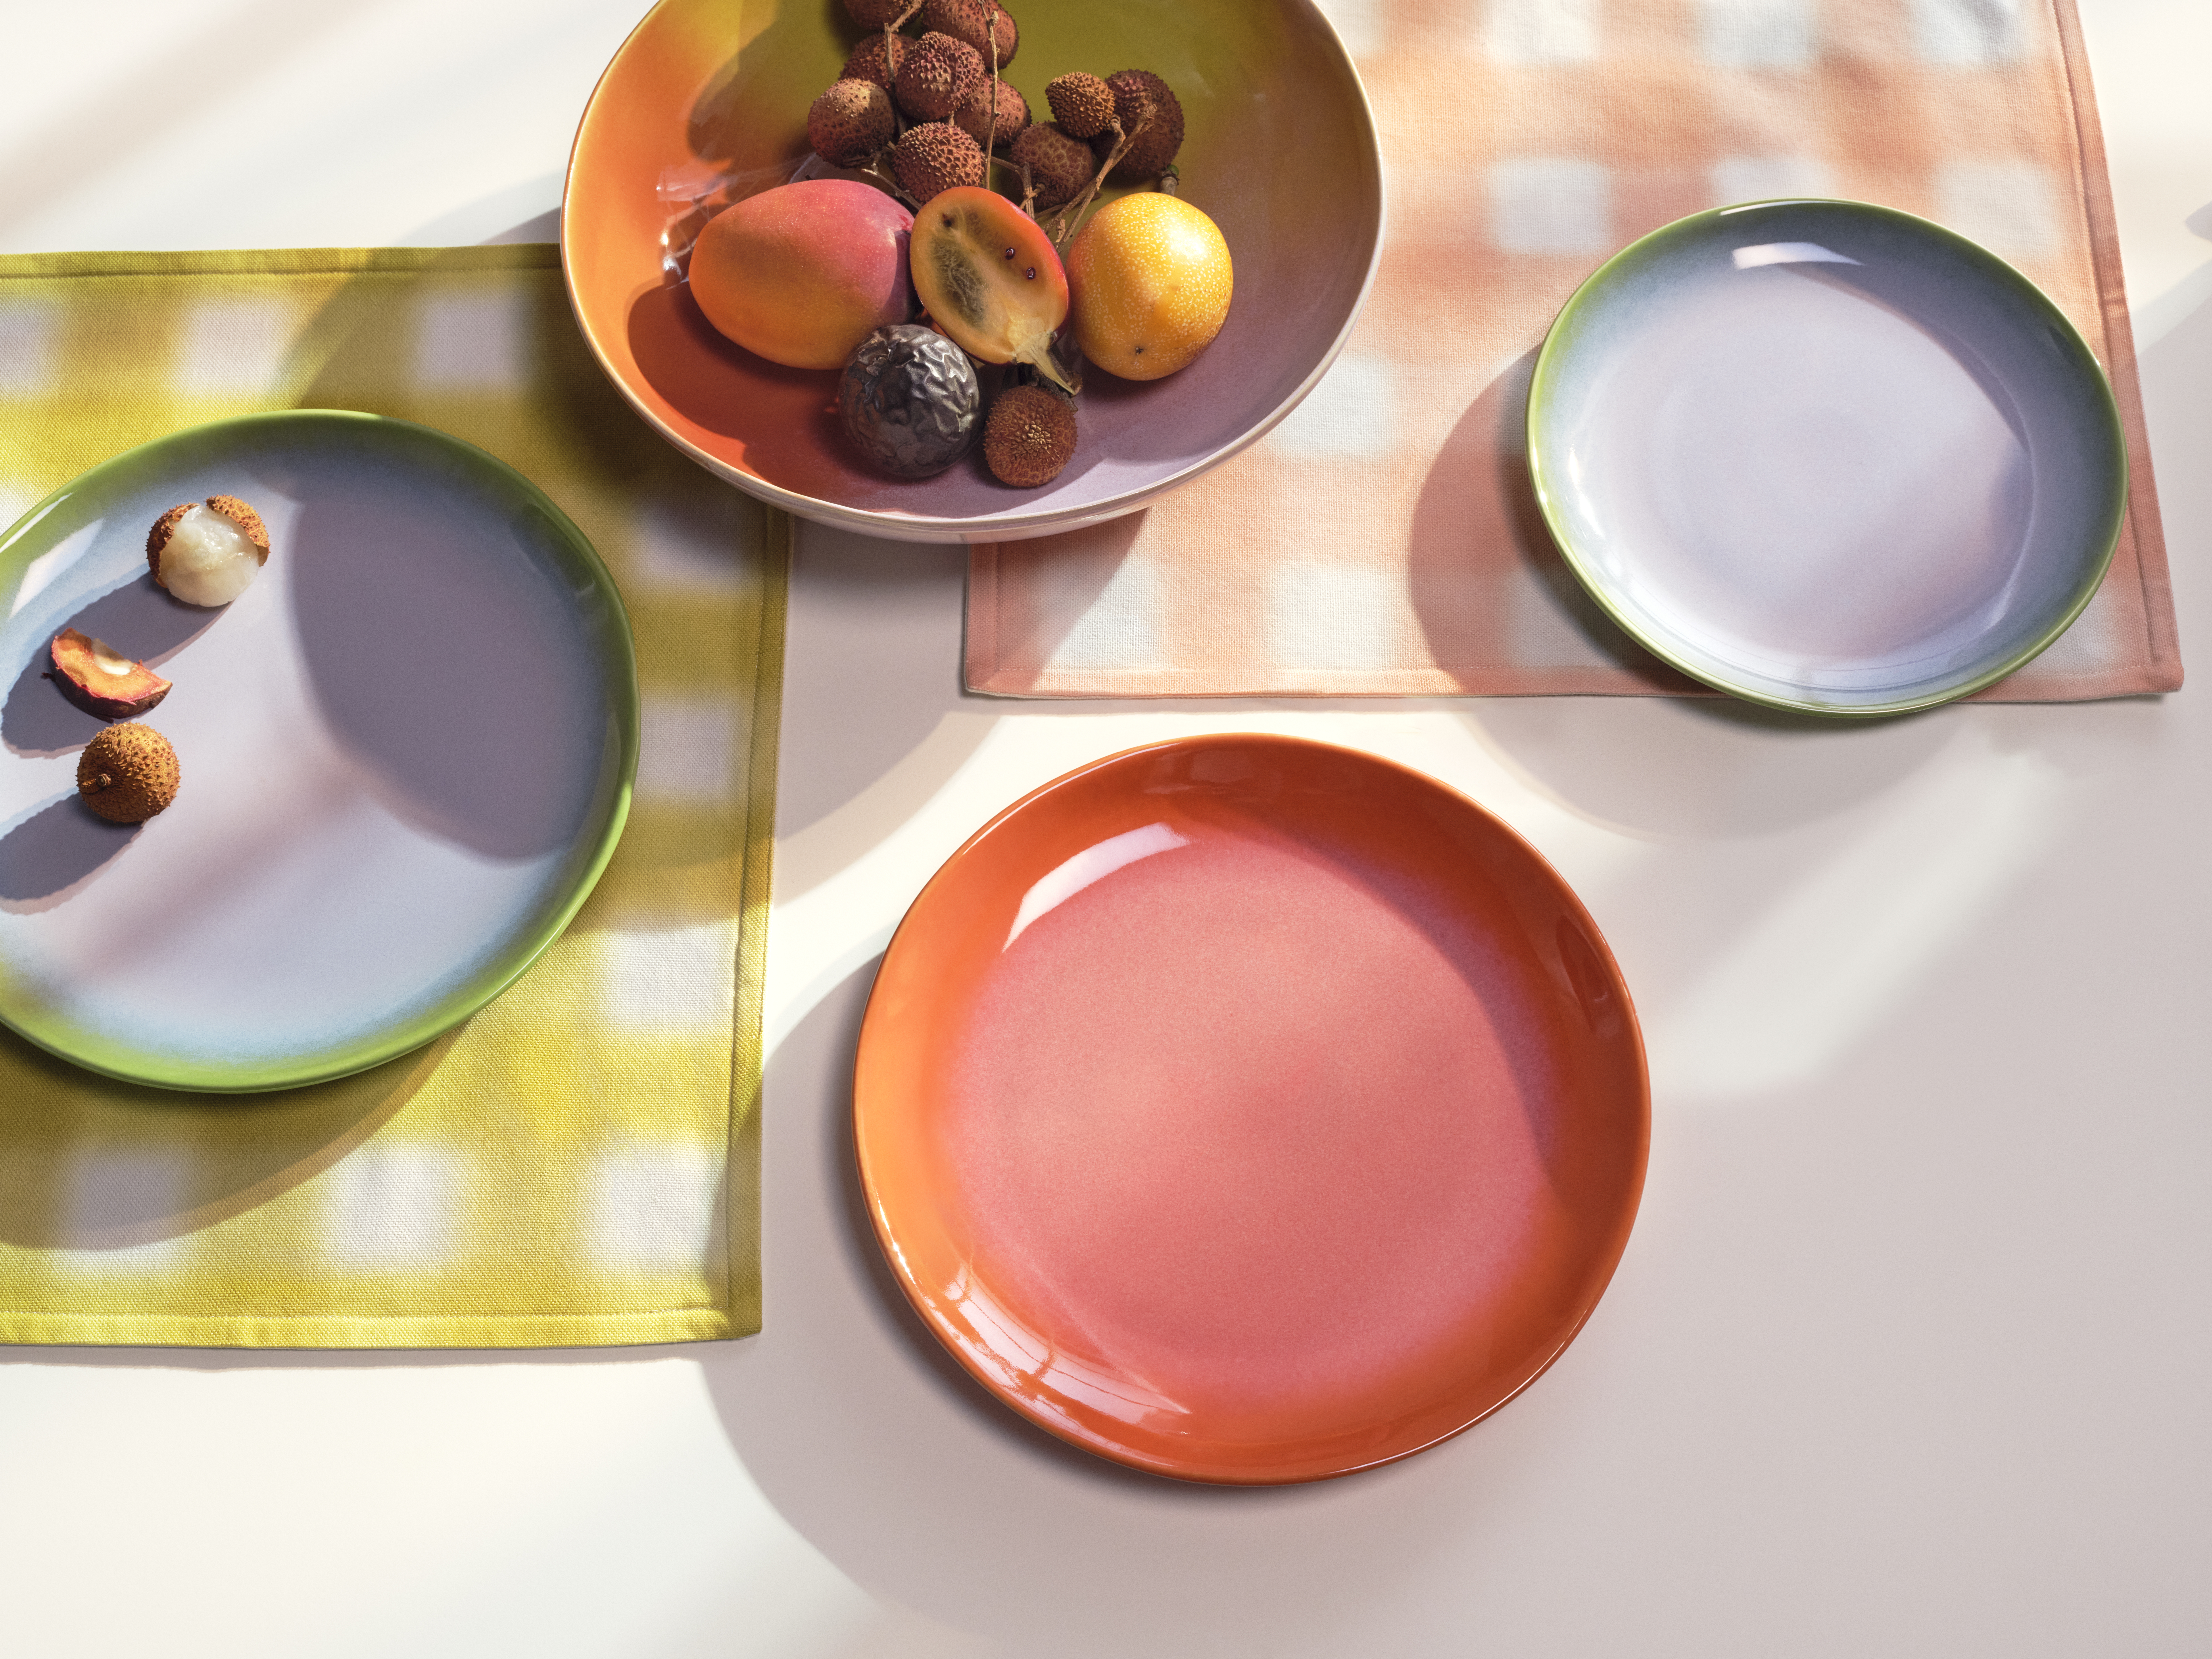 A selection of plates from the new India Mahdavi H&M HOME collection